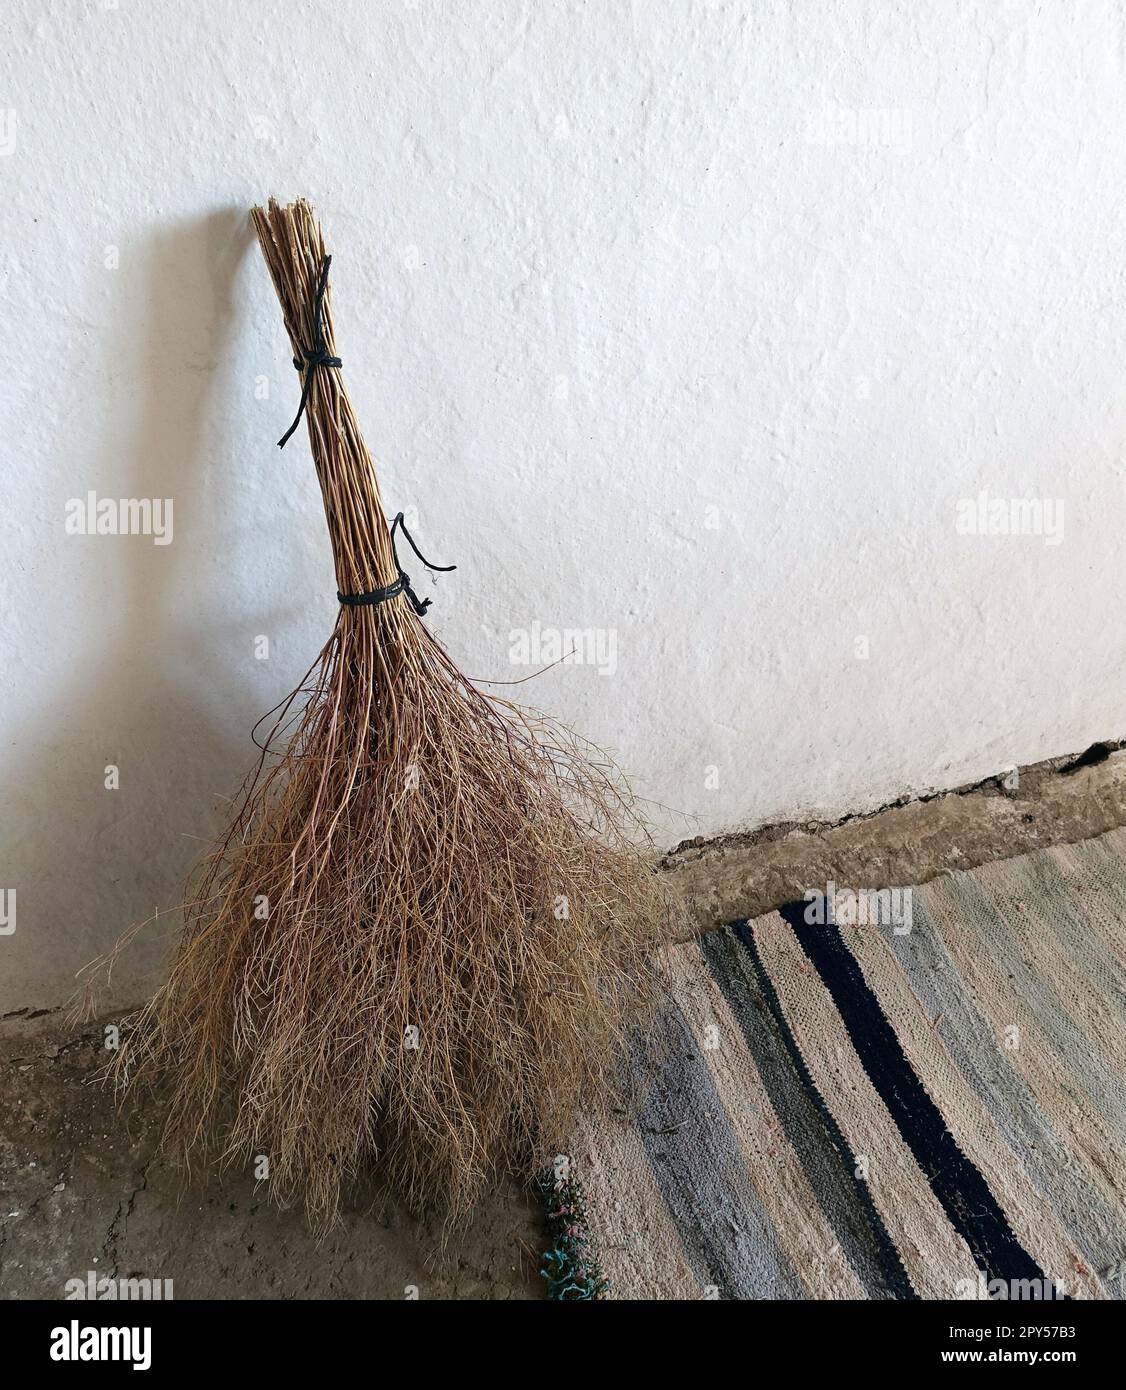 hand woven classic carpet and handmade grass broom, classic village household items Stock Photo